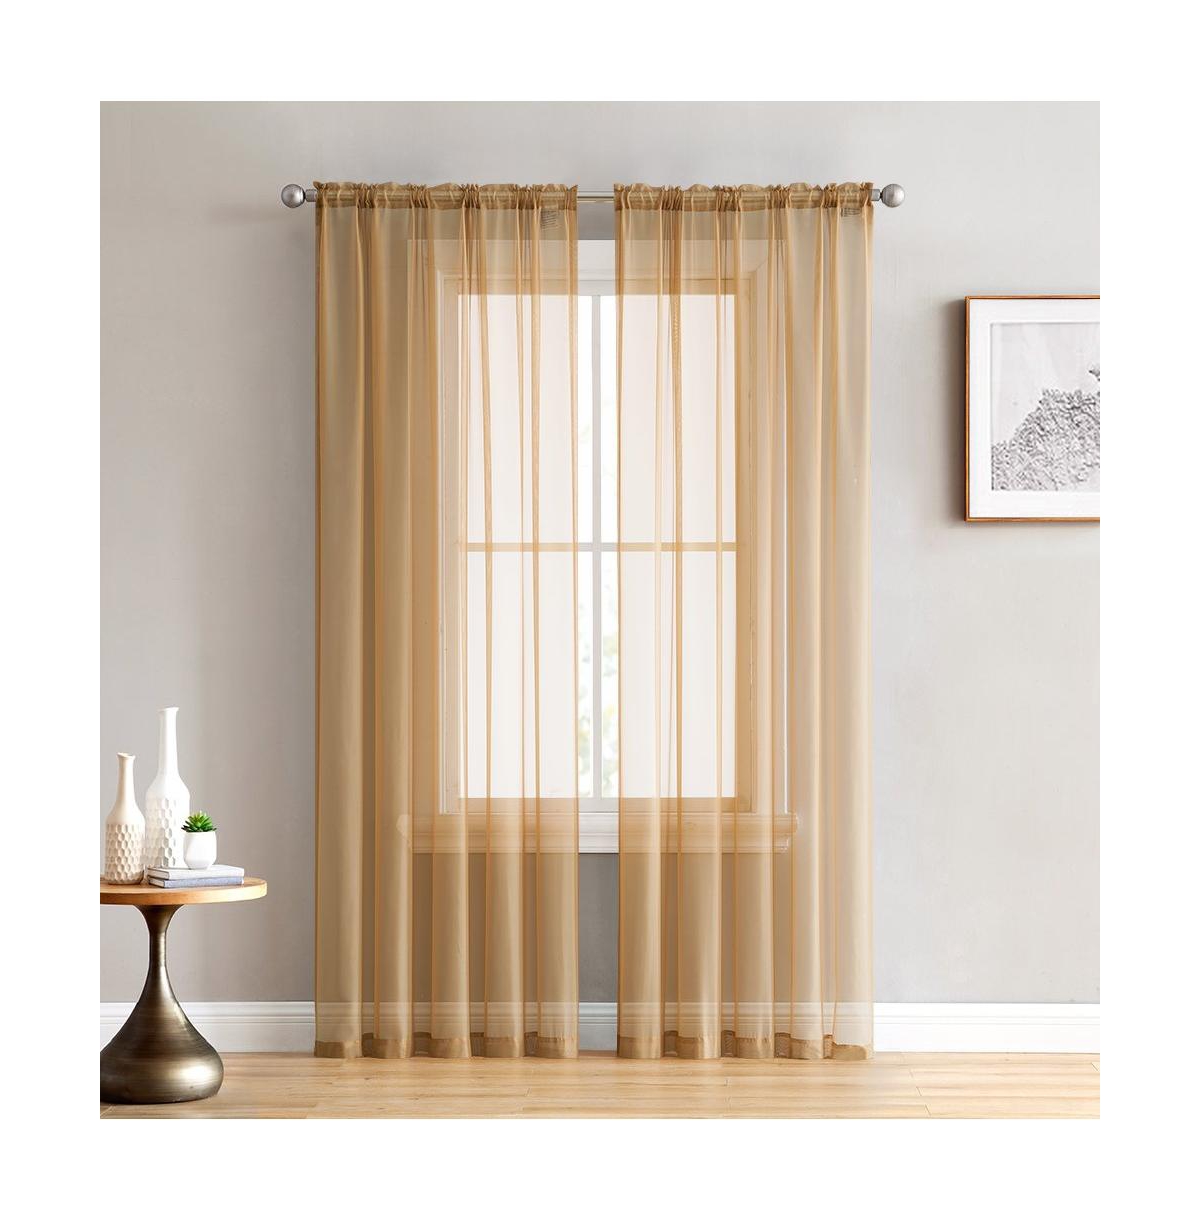 2 Pack Sheer Voile Window Curtain Sheer Panels - Gold